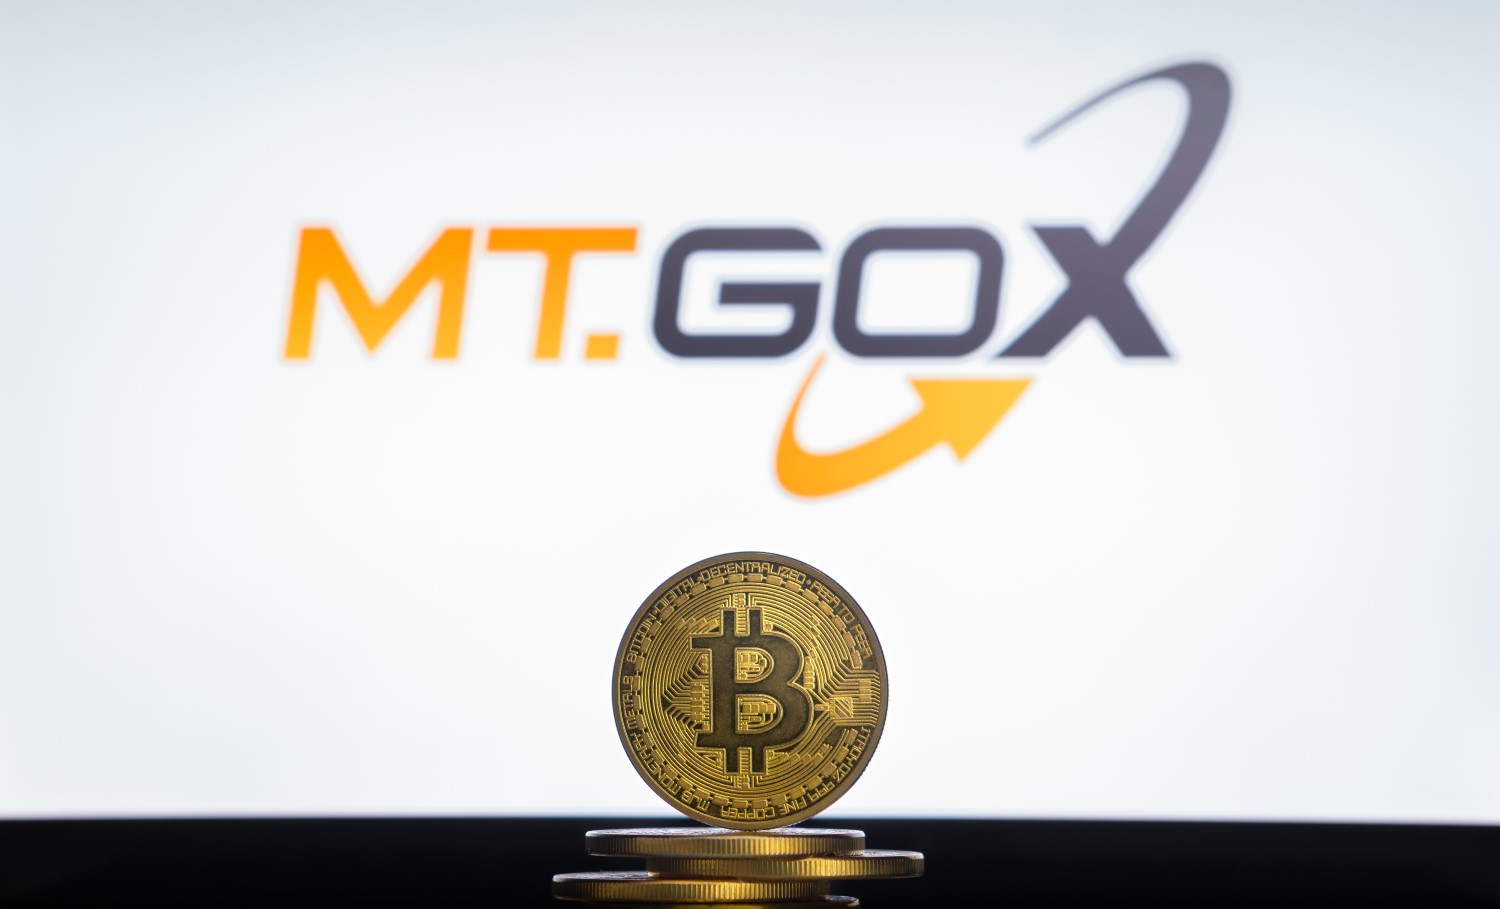 Investor-fortress-raises-buyout-offer-for-mt.-gox-creditor-claims-by-71%